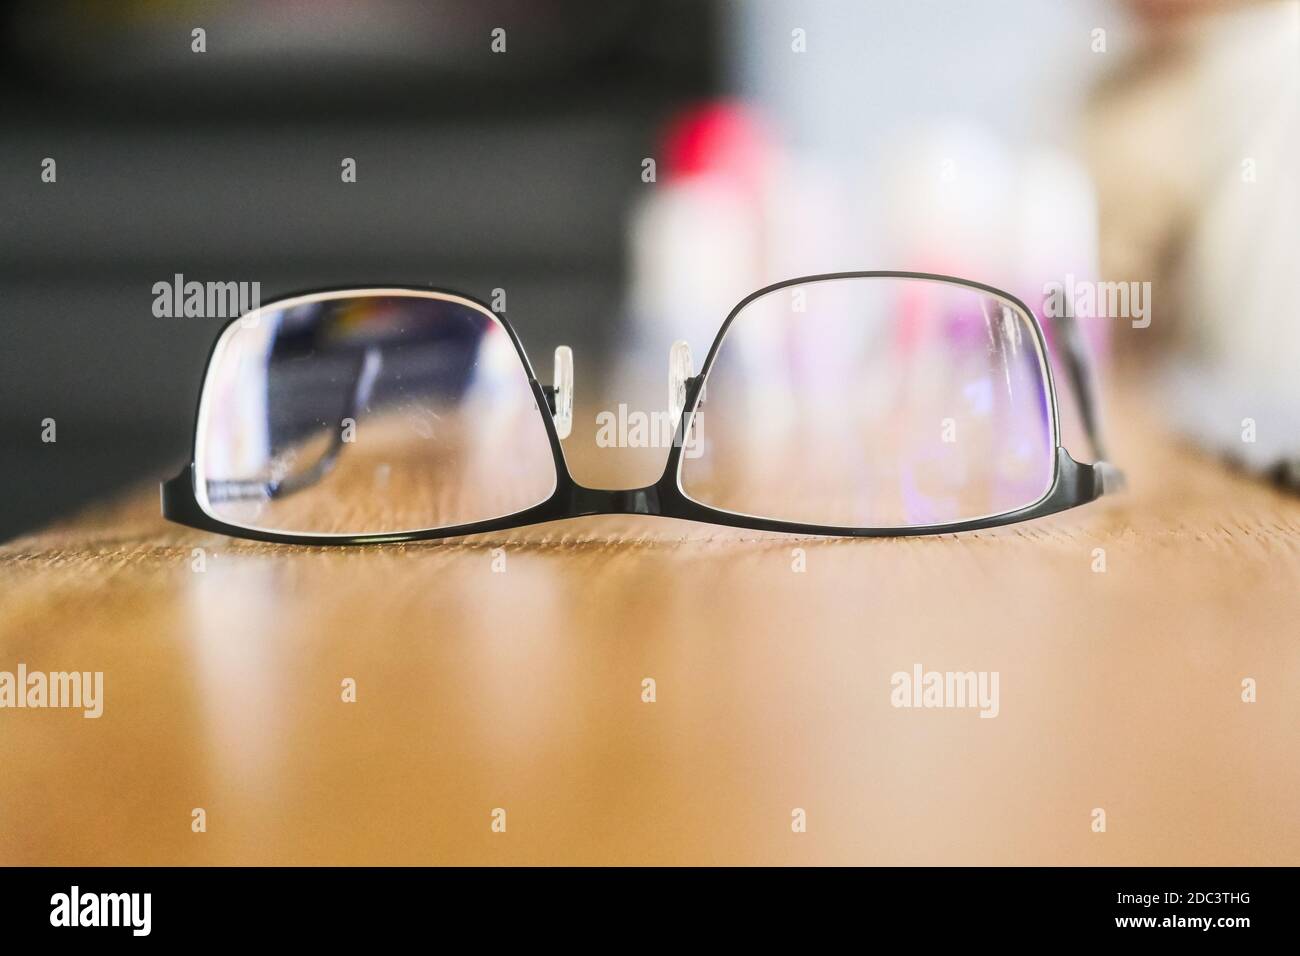 Eyeglasses upside down on wooden surface. Close up. Selective focus. Stock Photo